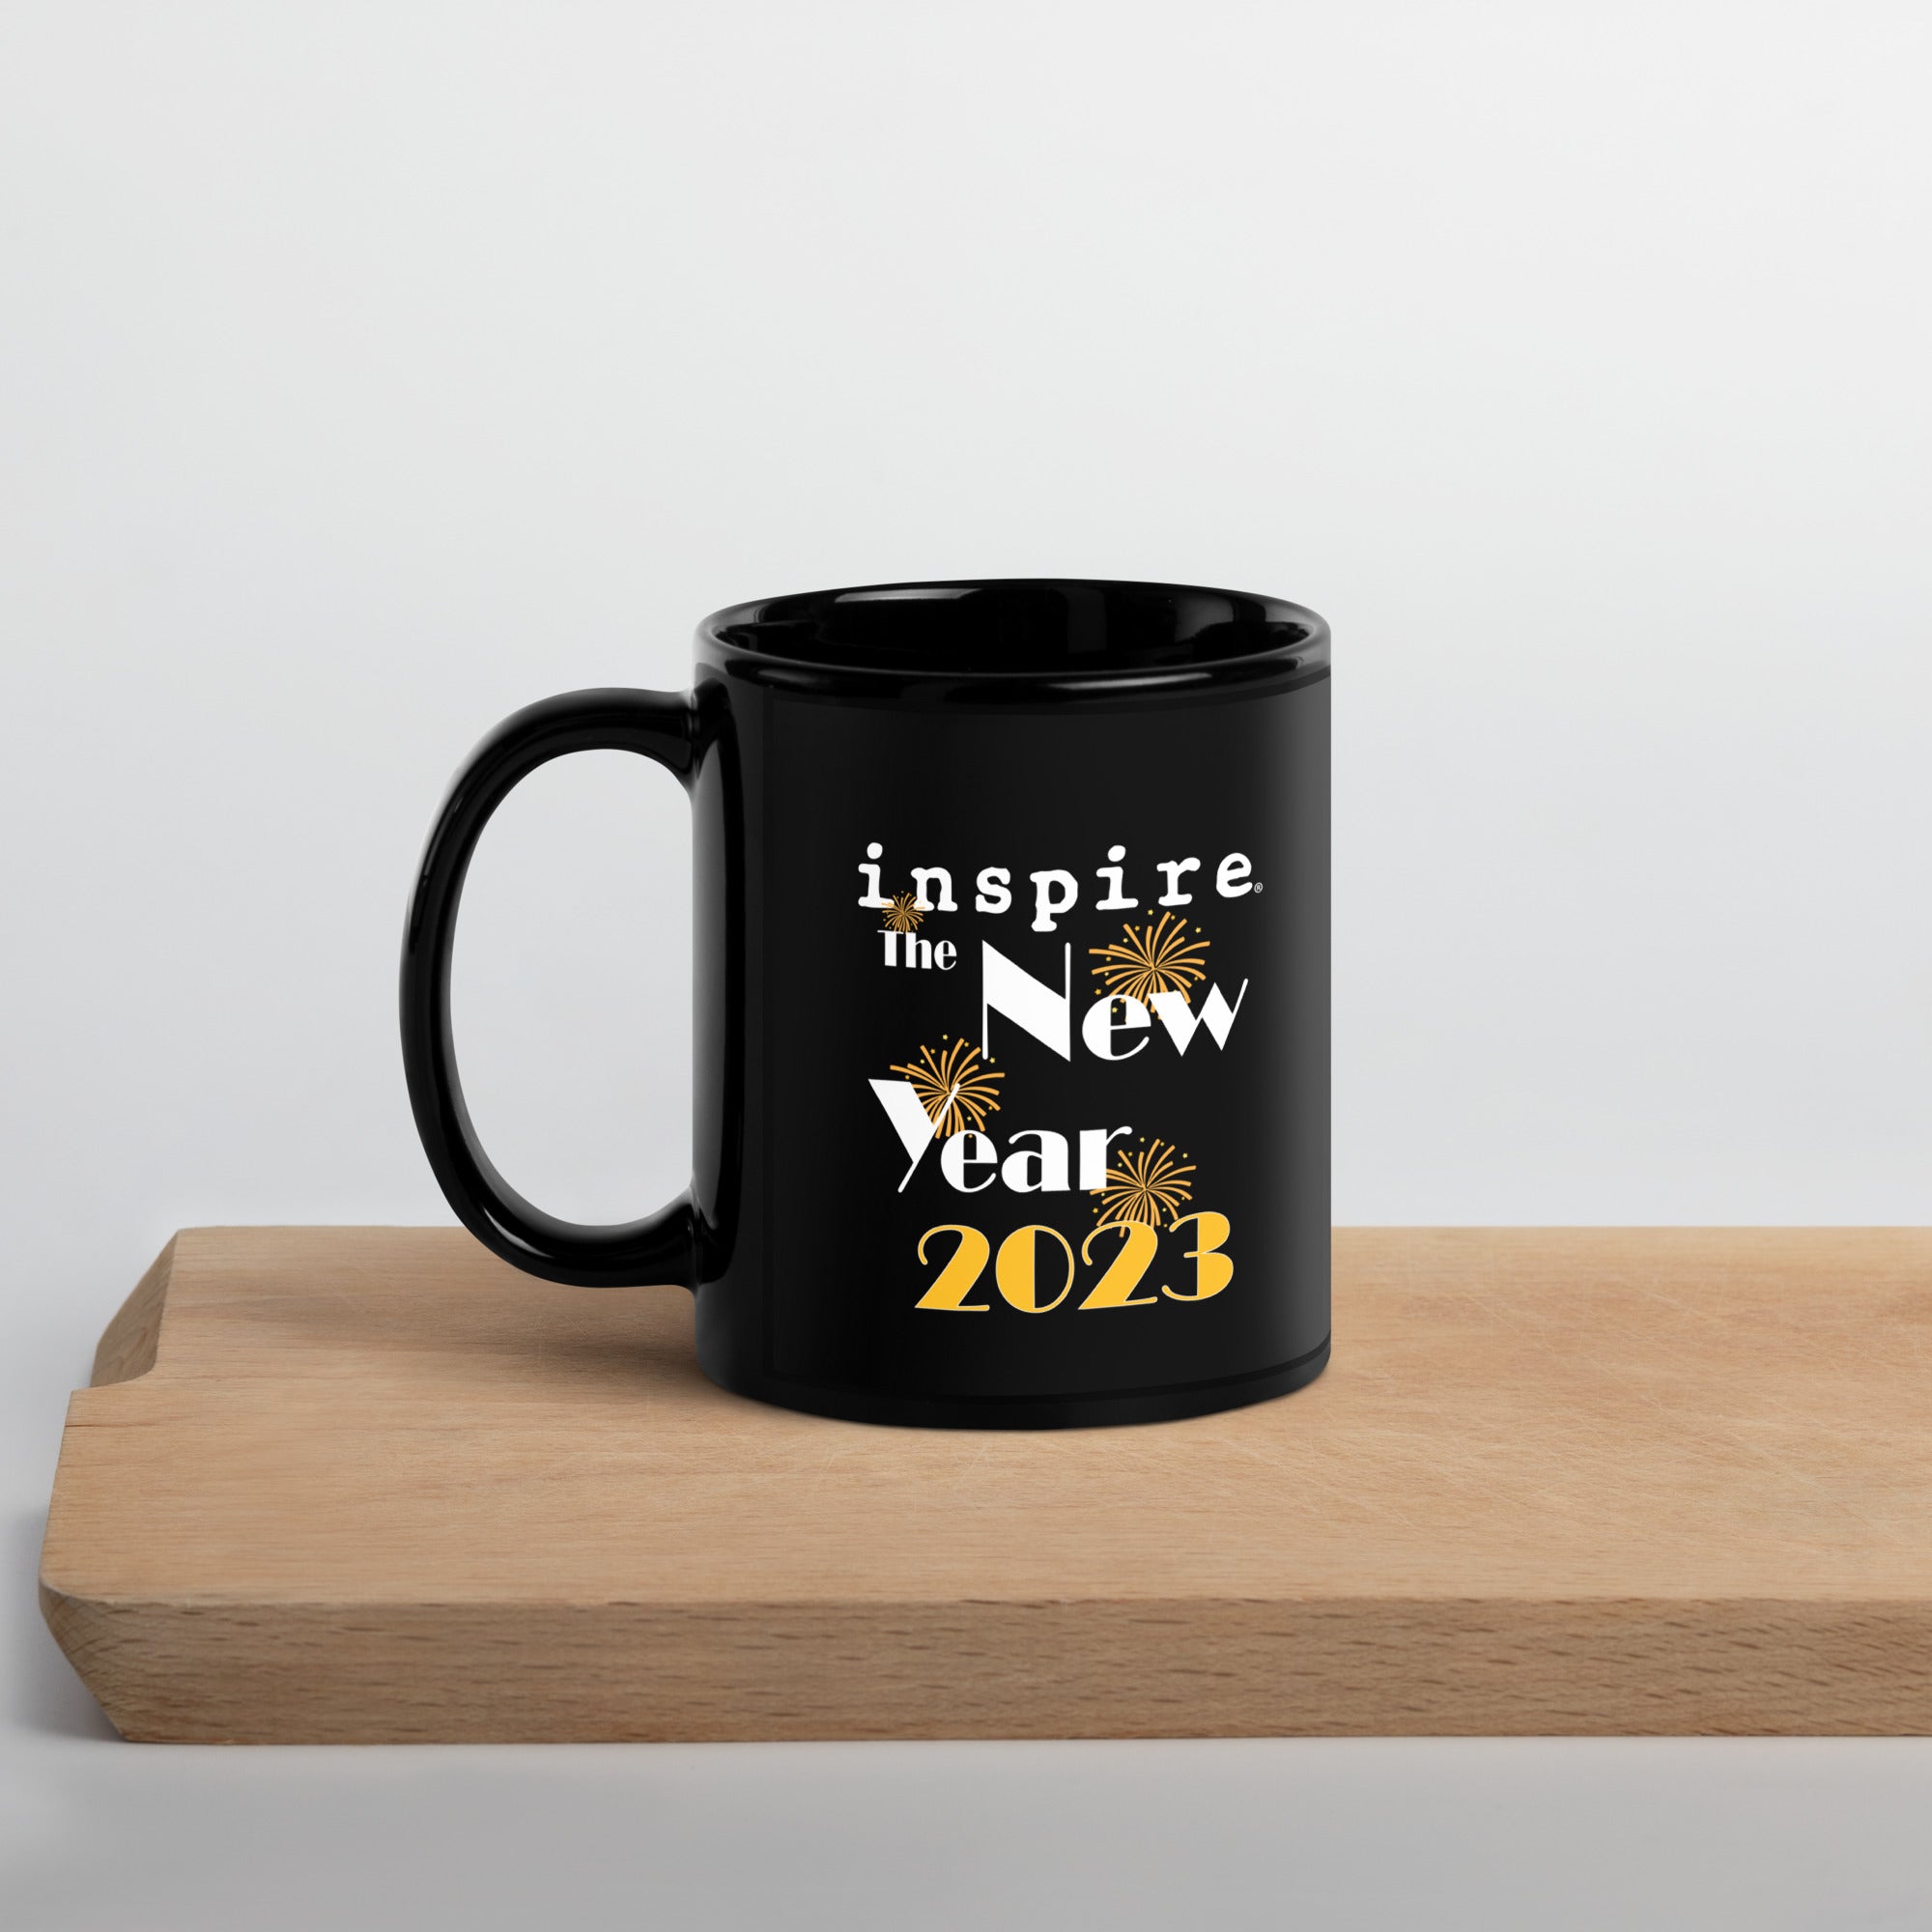 Unspillable Cup For Spill-Proof Drinking - Inspire Uplift in 2023